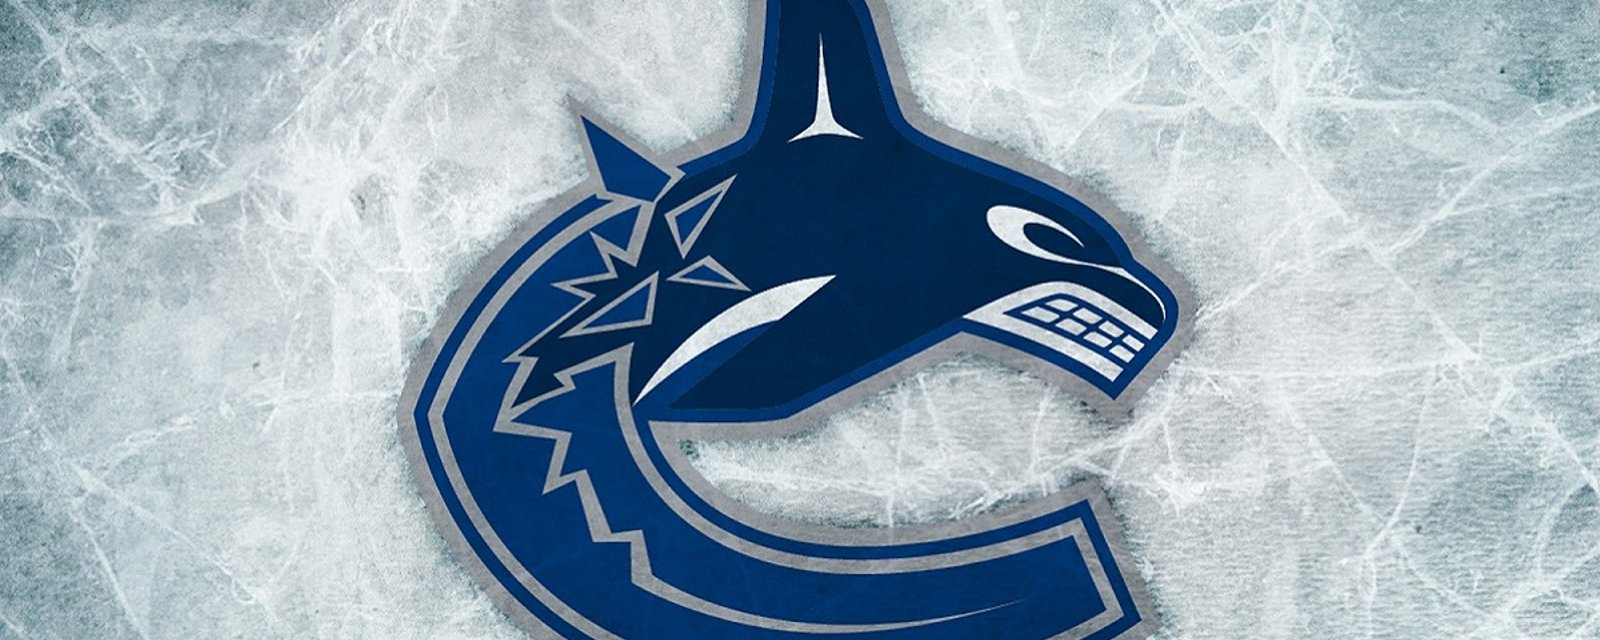 Big trade rumors as team sends two scouts to Canucks game.